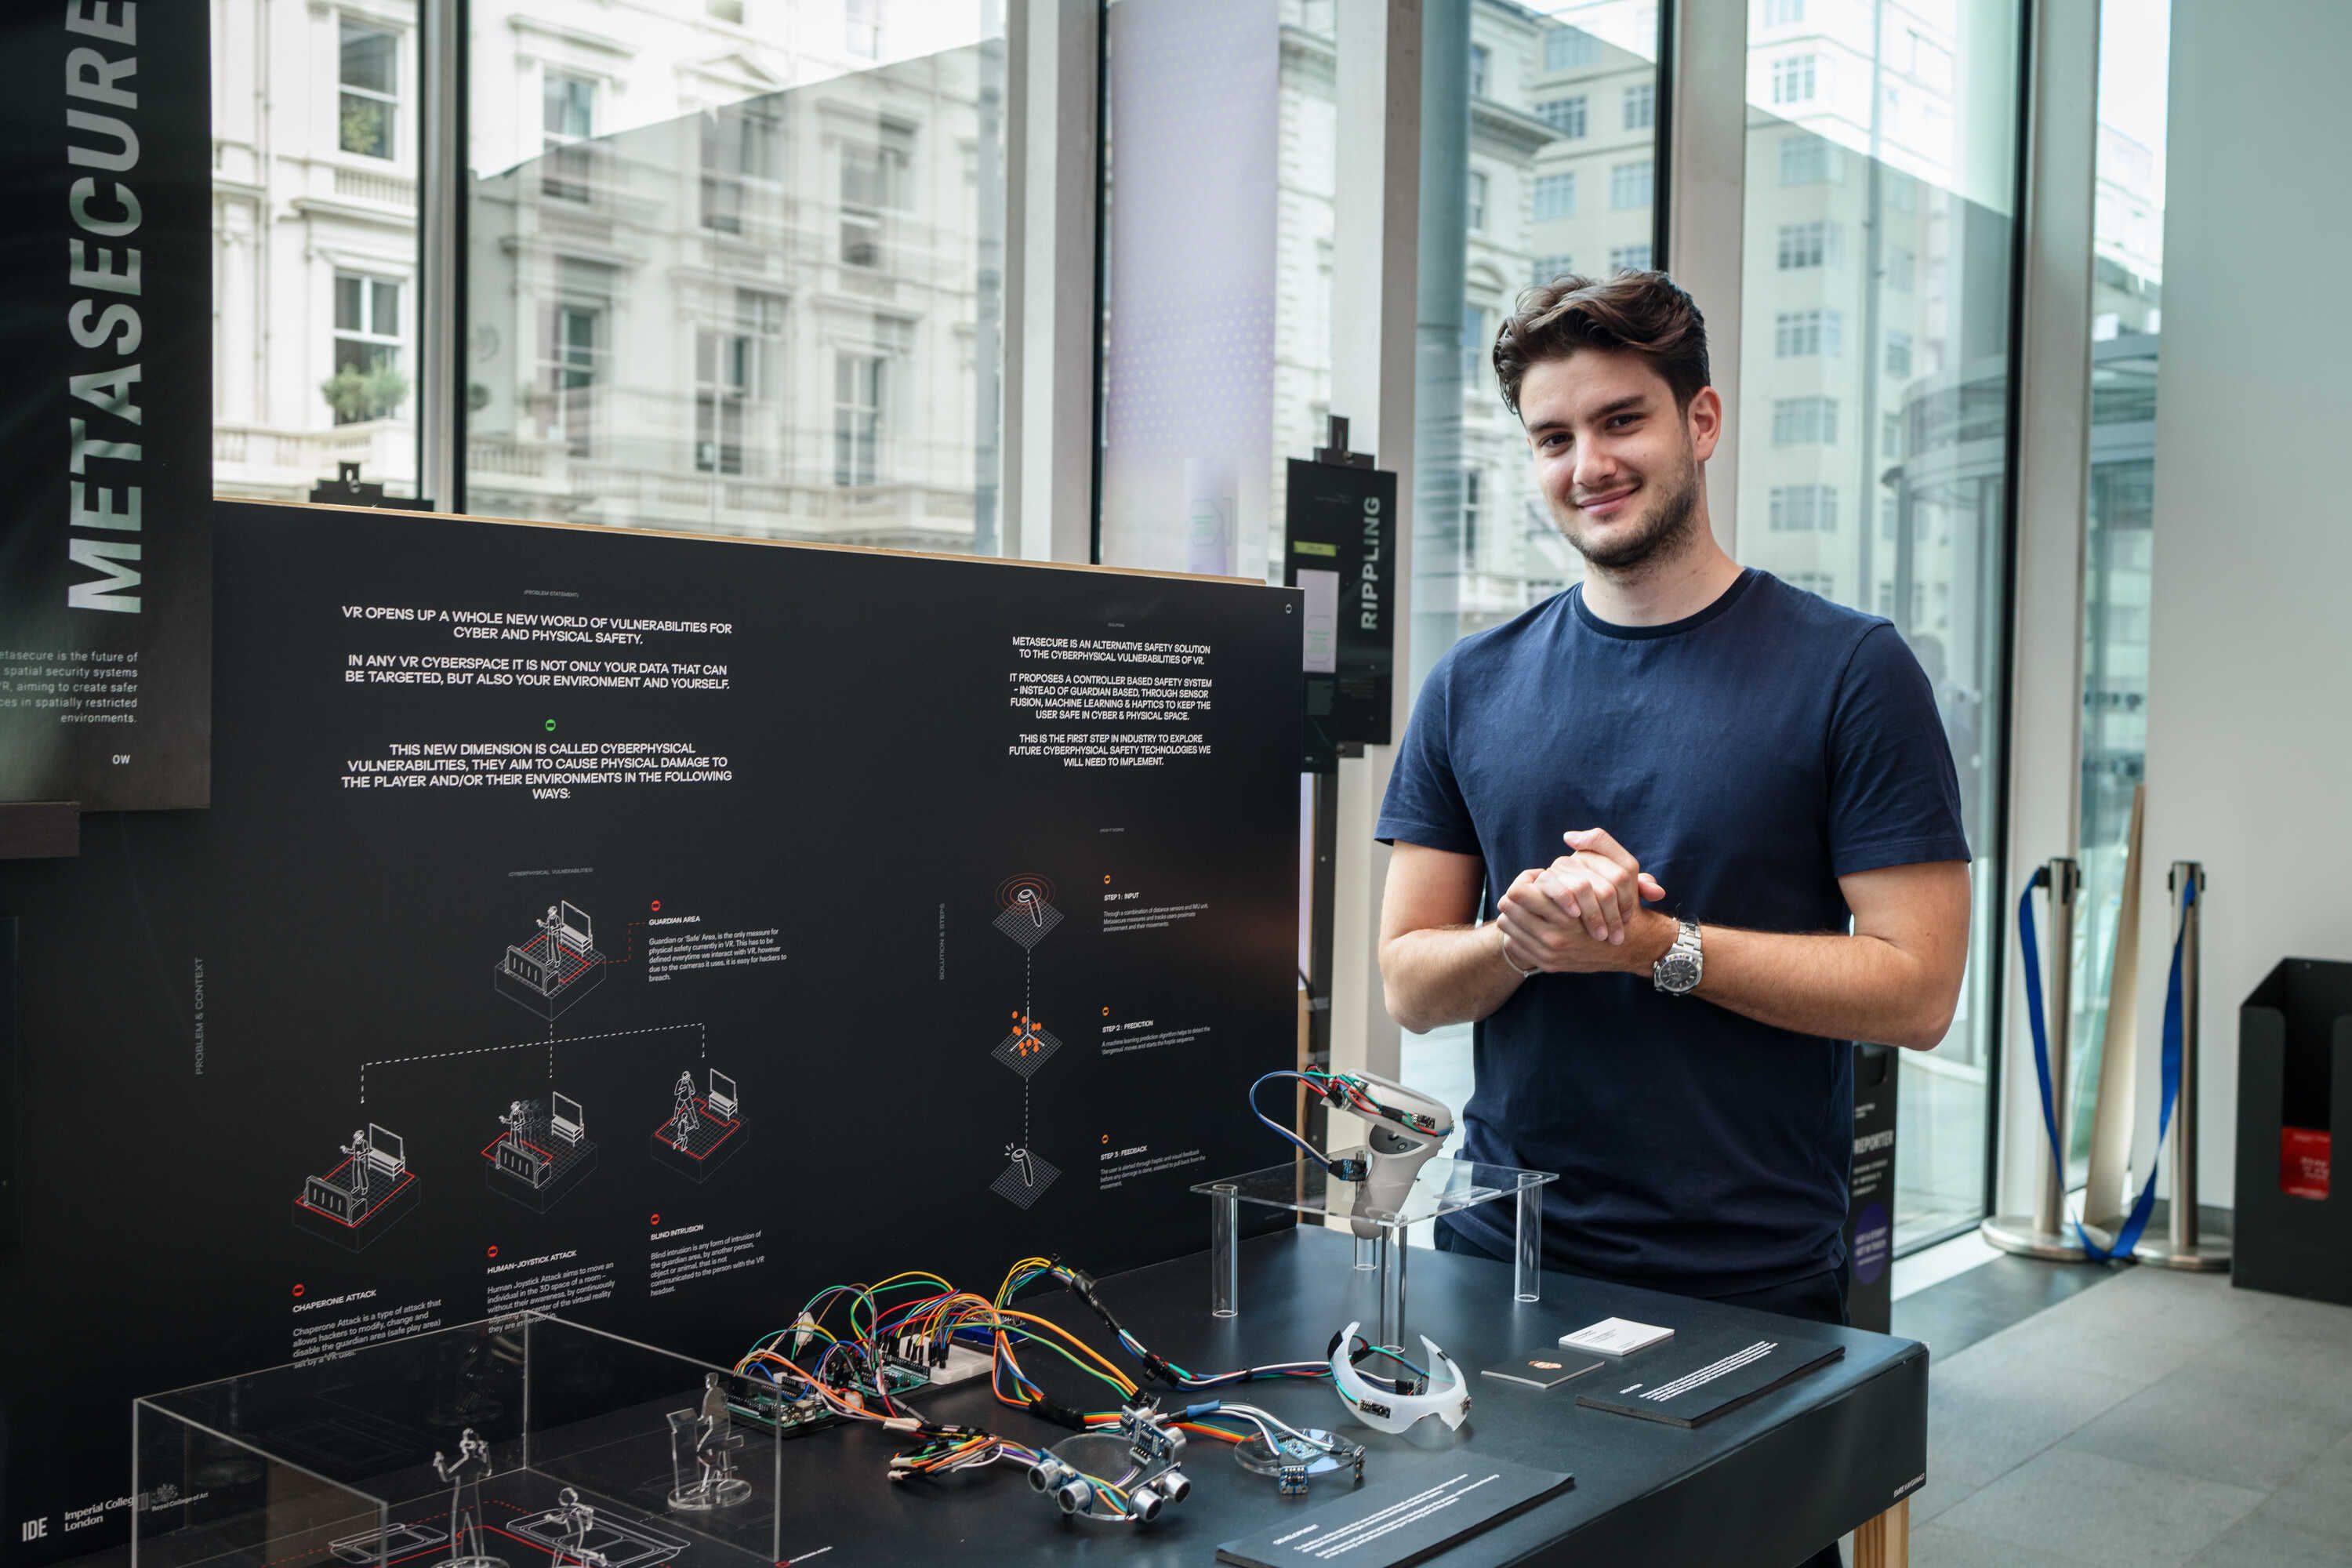 Design Engineering student standing next to project display